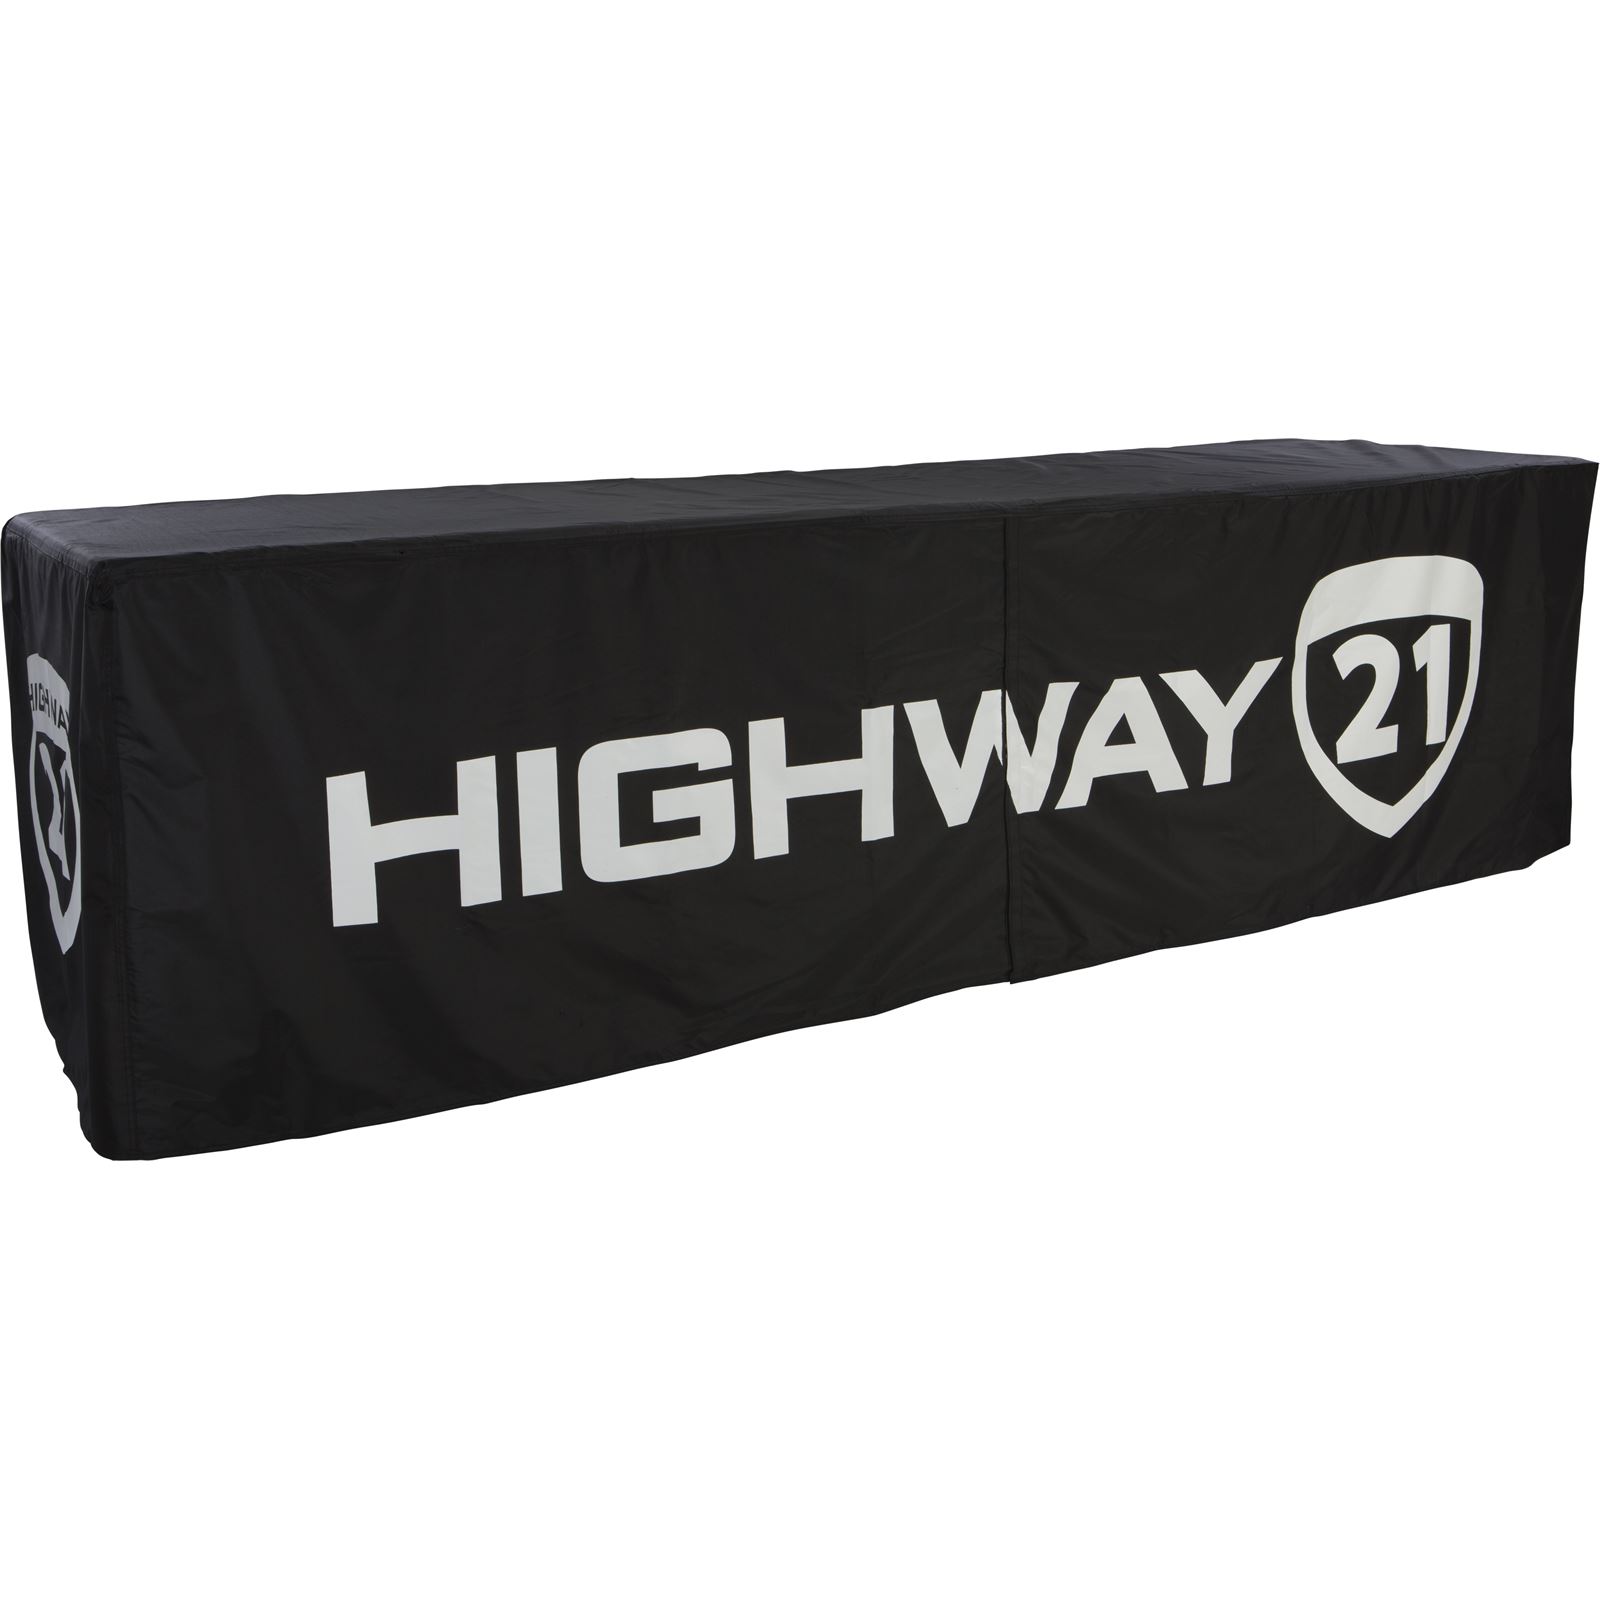 Highway 21 Table Cover